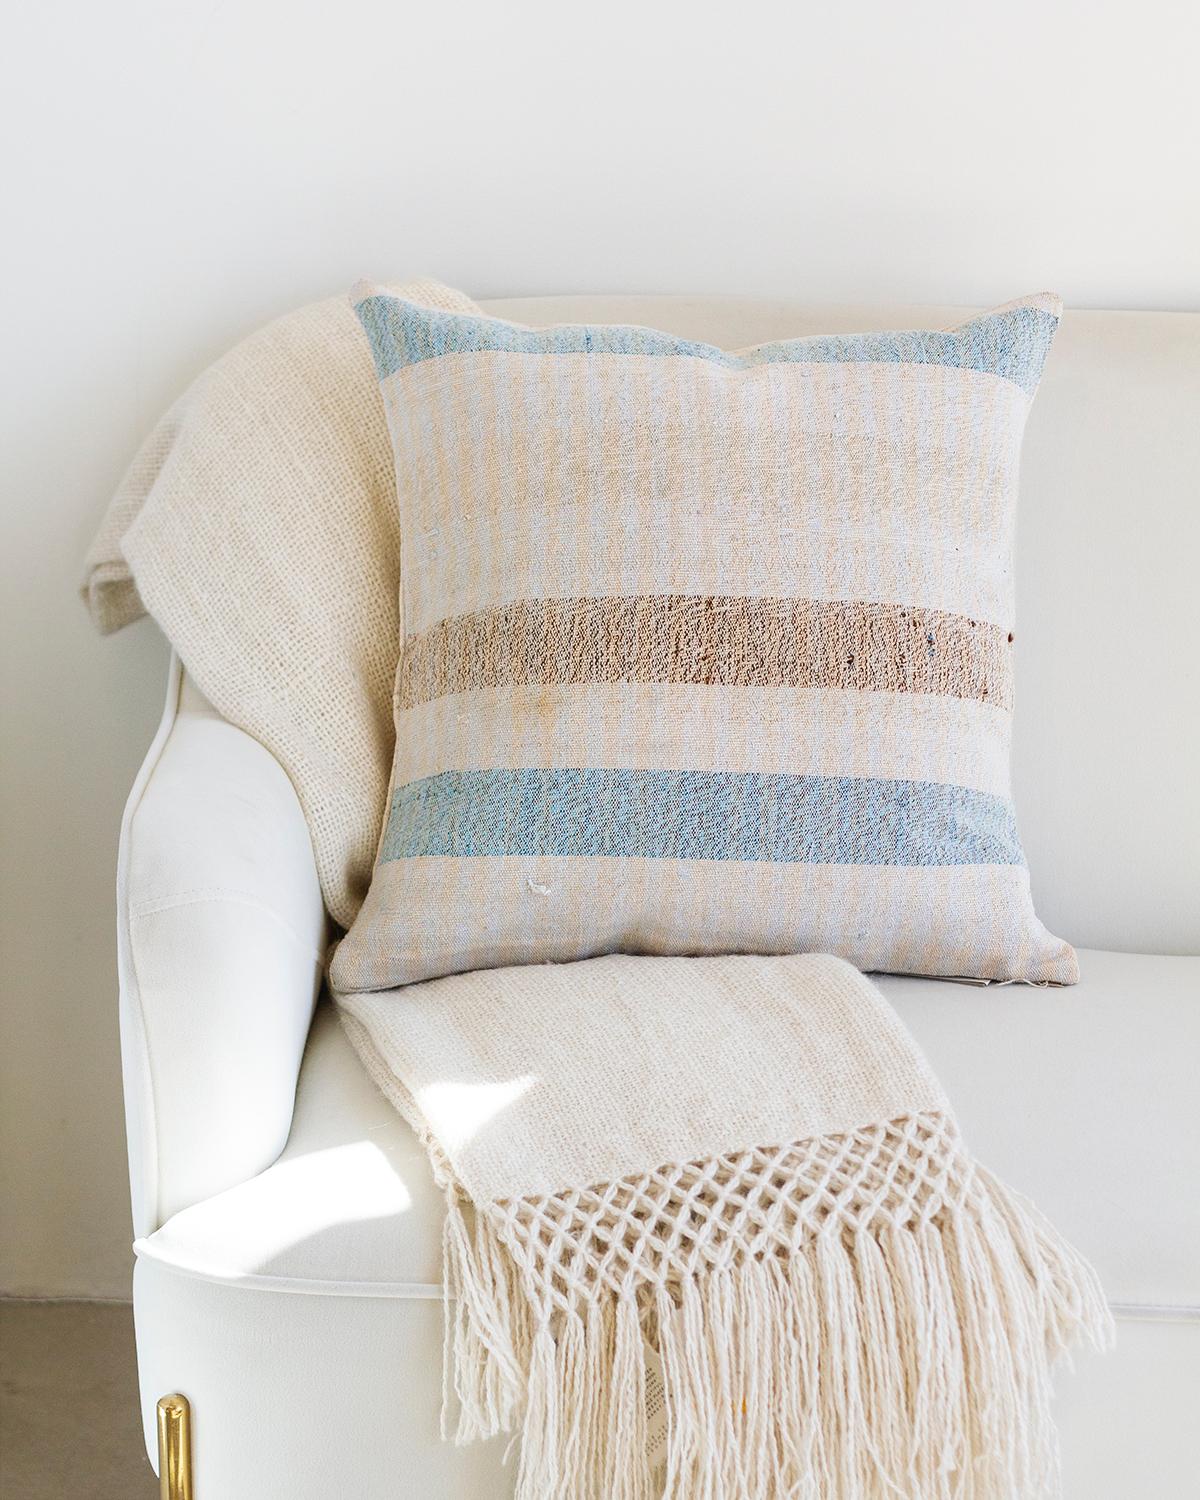 Portuguese Matilde Blue and Brown Striped Lumbar Throw Pillow made from Vintage Linen For Sale